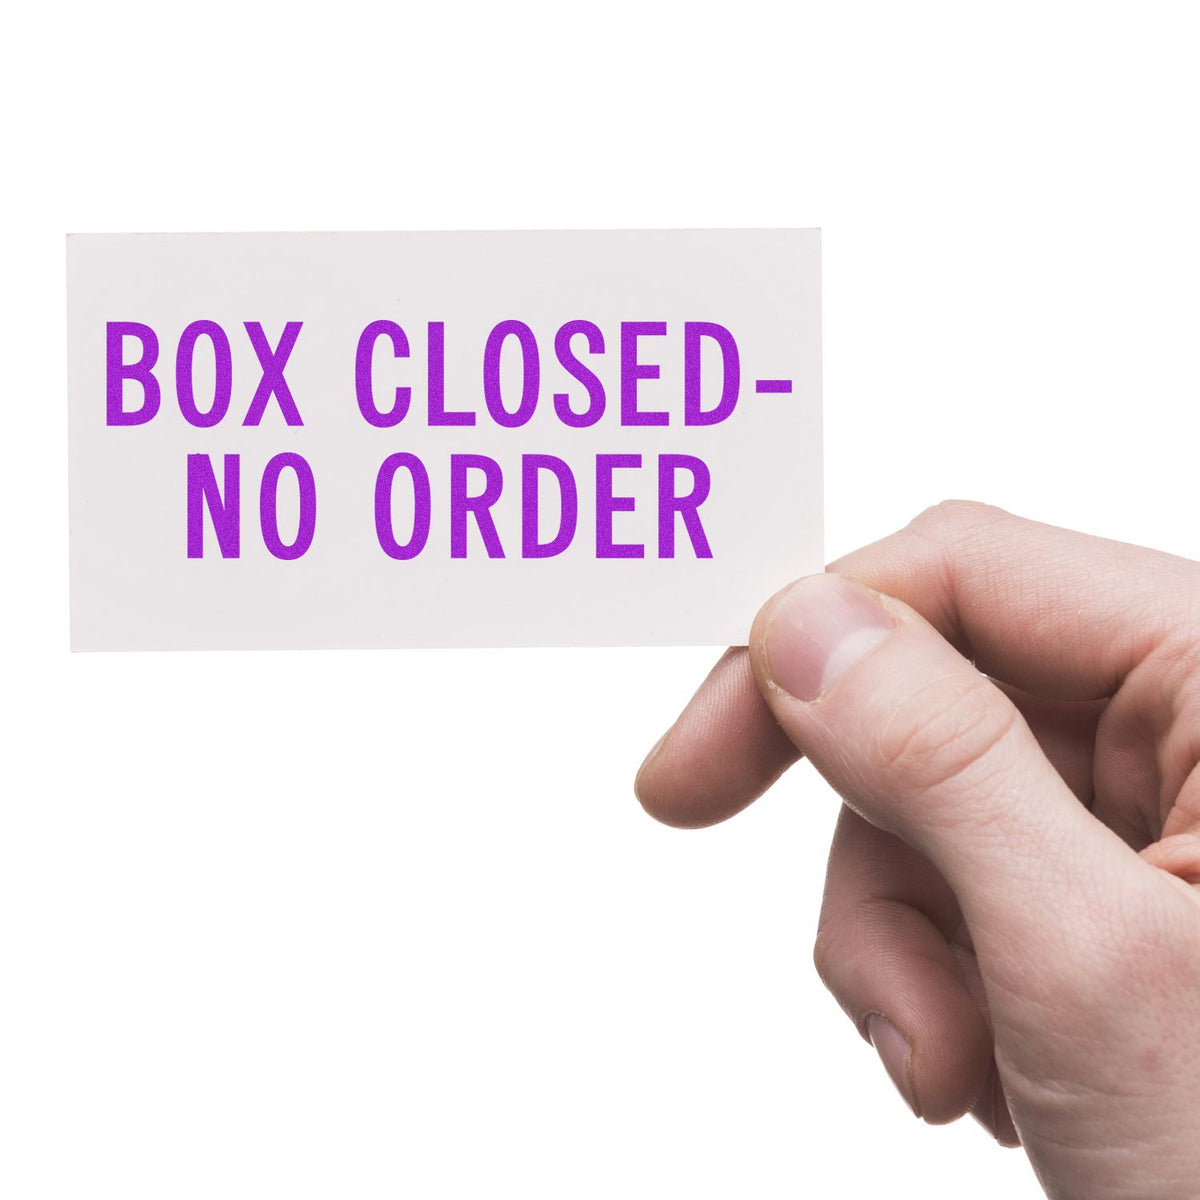 Large Self-Inking Box Closed No Order Stamp In Use